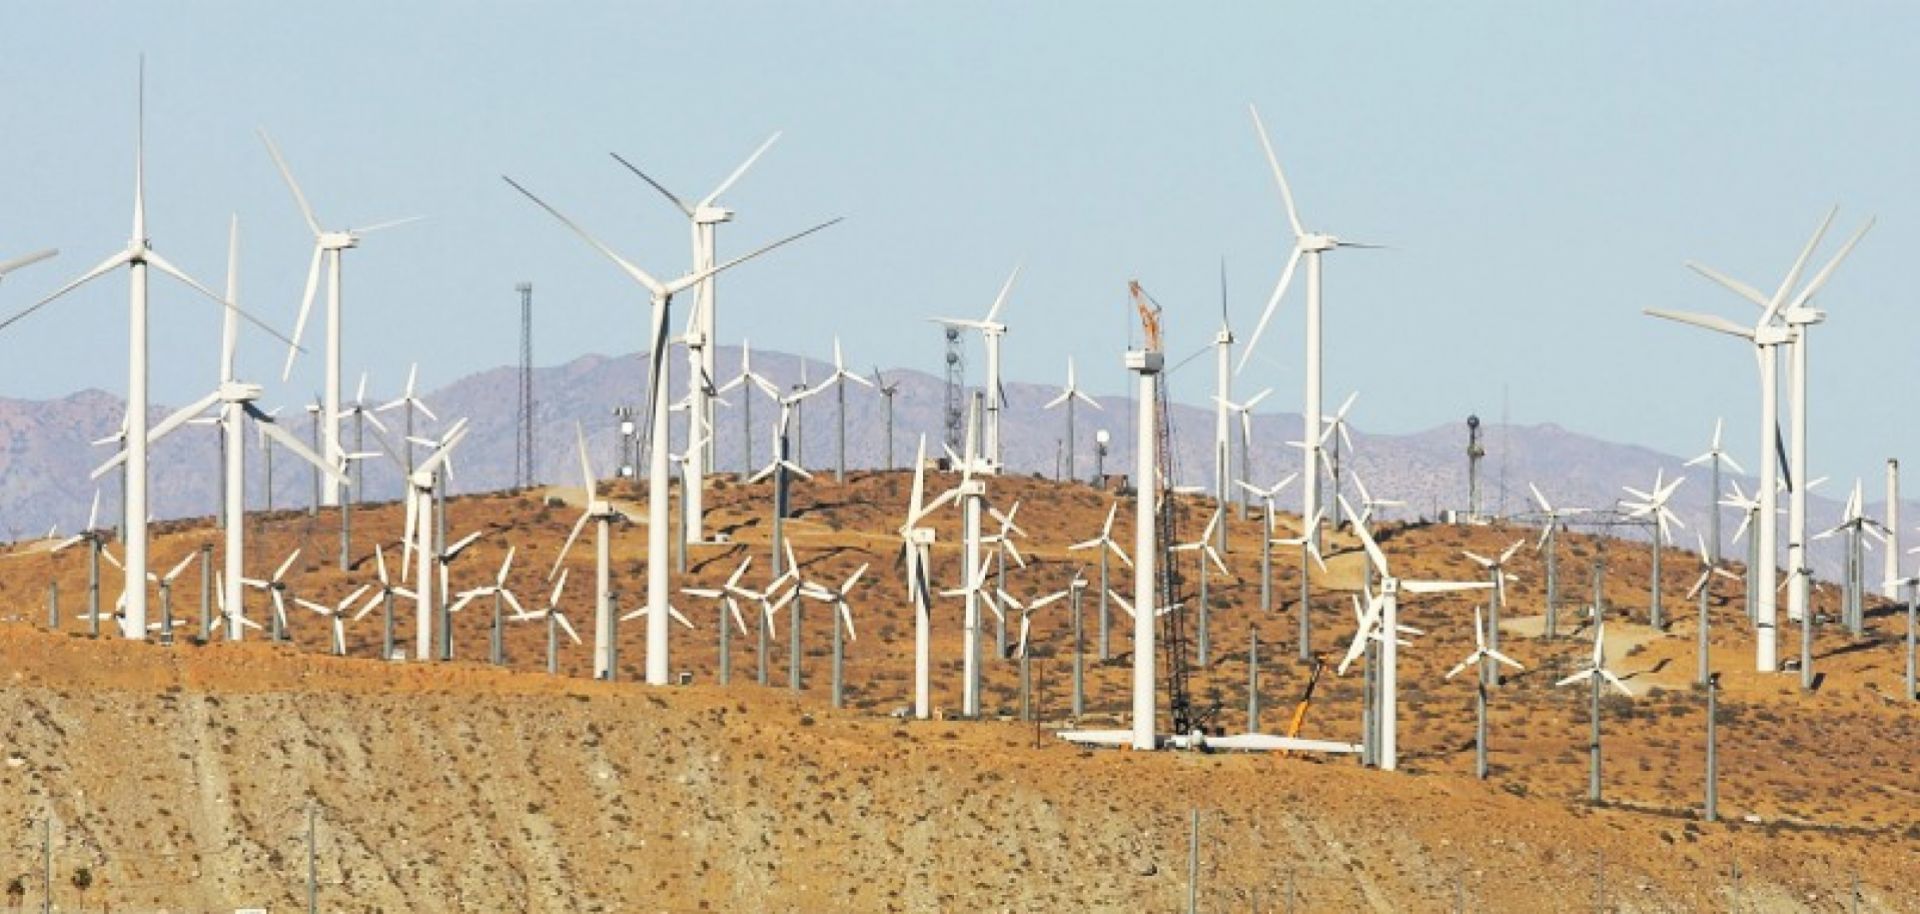 Effect of wind energy on supply chains